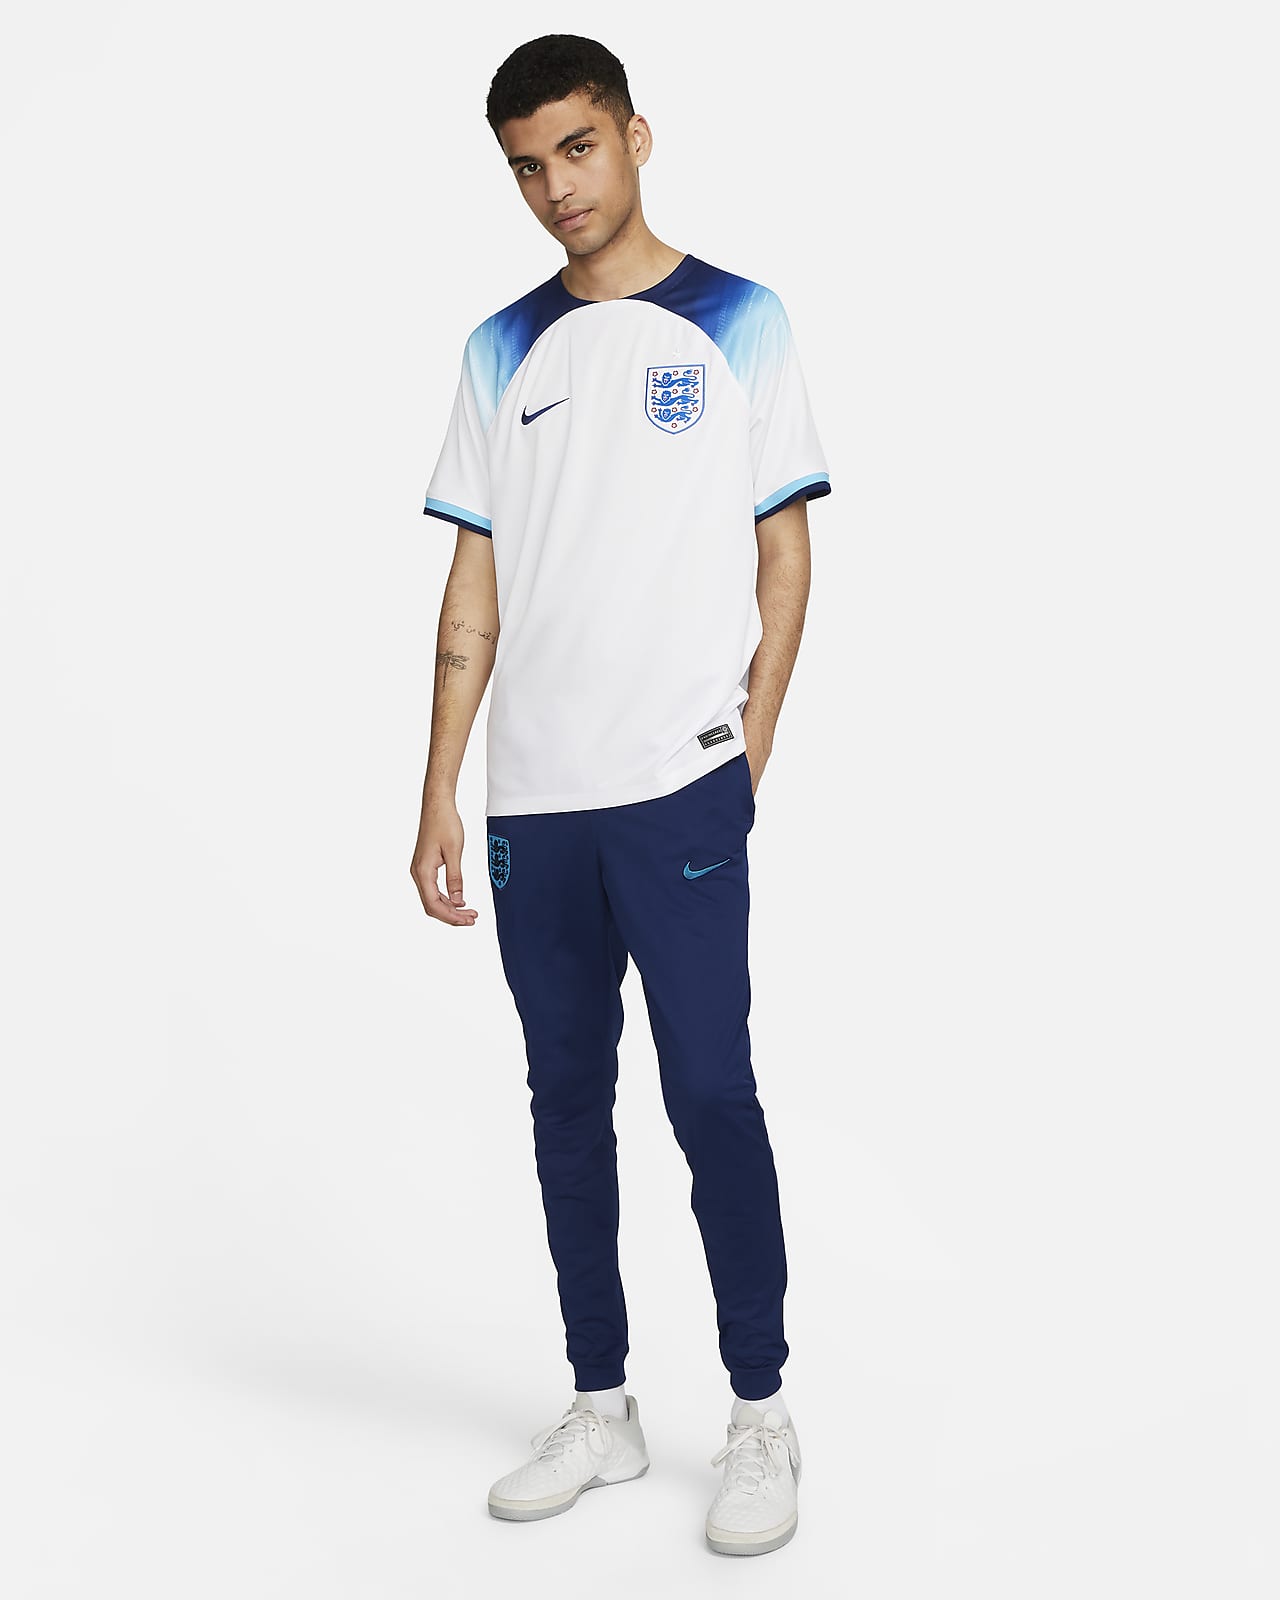 Football | Jogging bottoms | Mens sports clothing | Sports & leisure |  www.very.co.uk